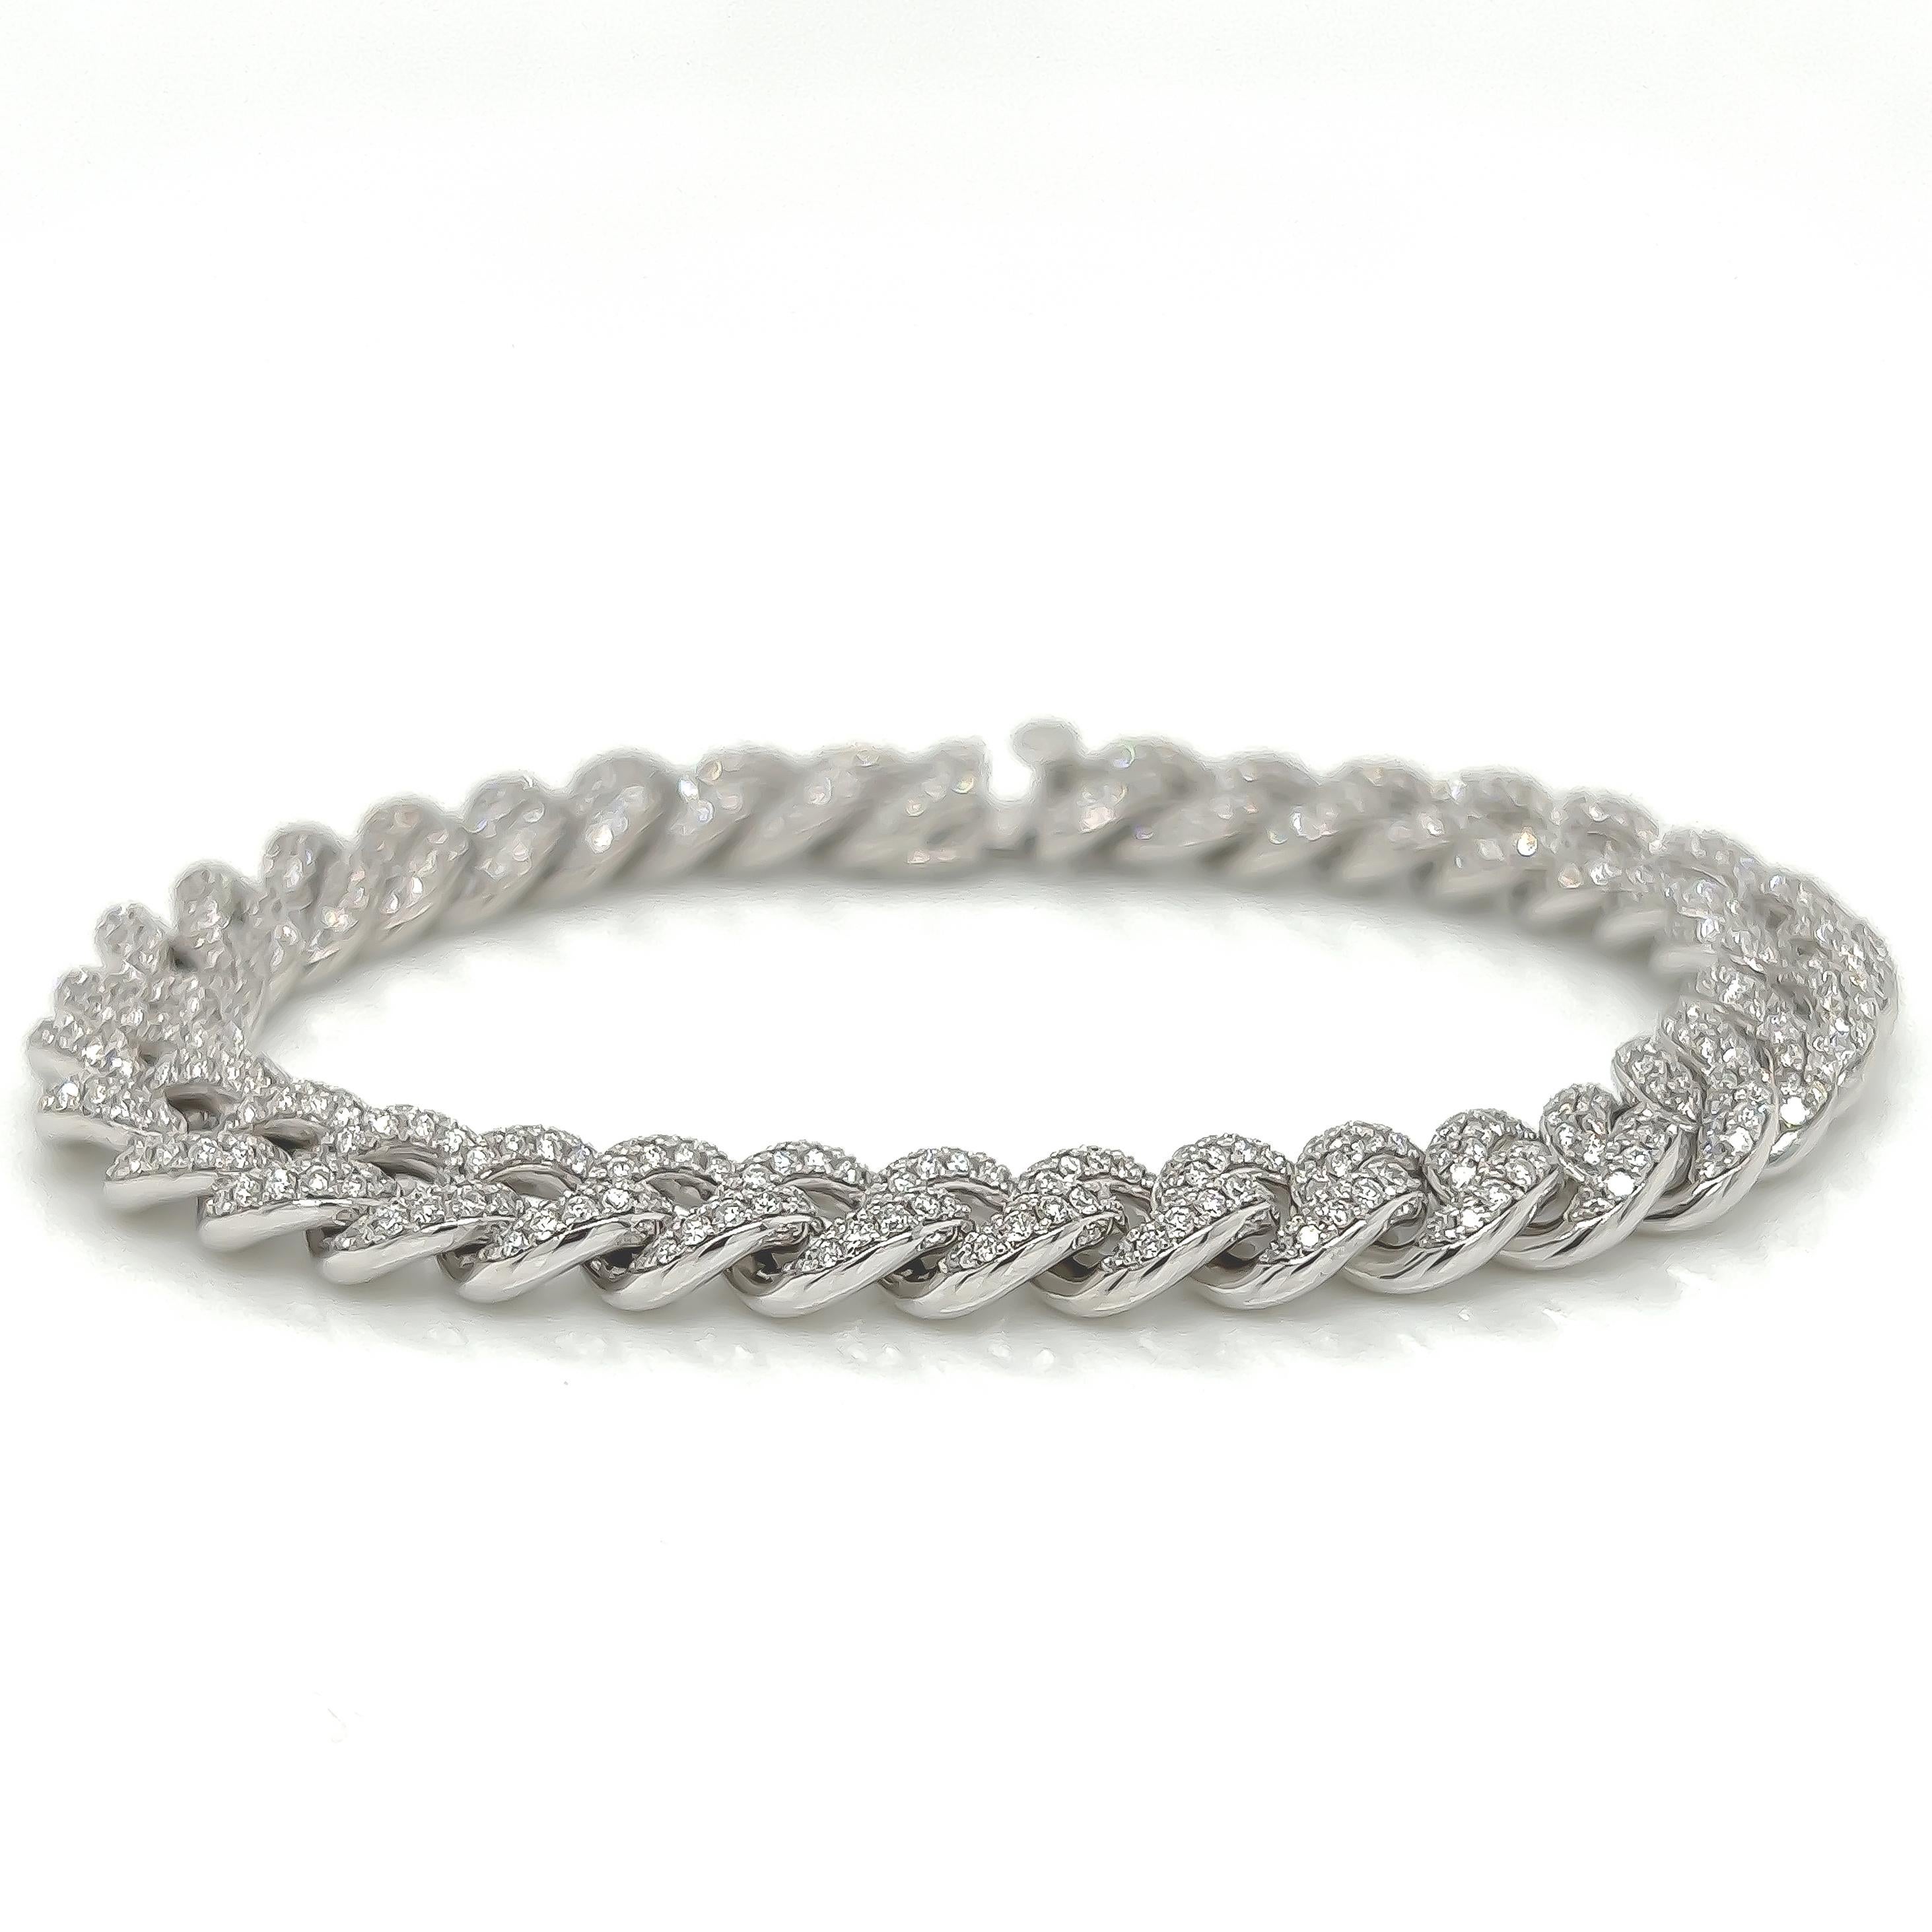 4.07 Carat 14K White Gold Iced Out Cuban Link Diamond Bracelet, 22.8g 

This handmade cuban link diamond bracelet weighs 22.8 grams. It boasts 4.07 Carats of sparkling round cut white diamonds exquisitely pave set into cuban links. The bracelet is